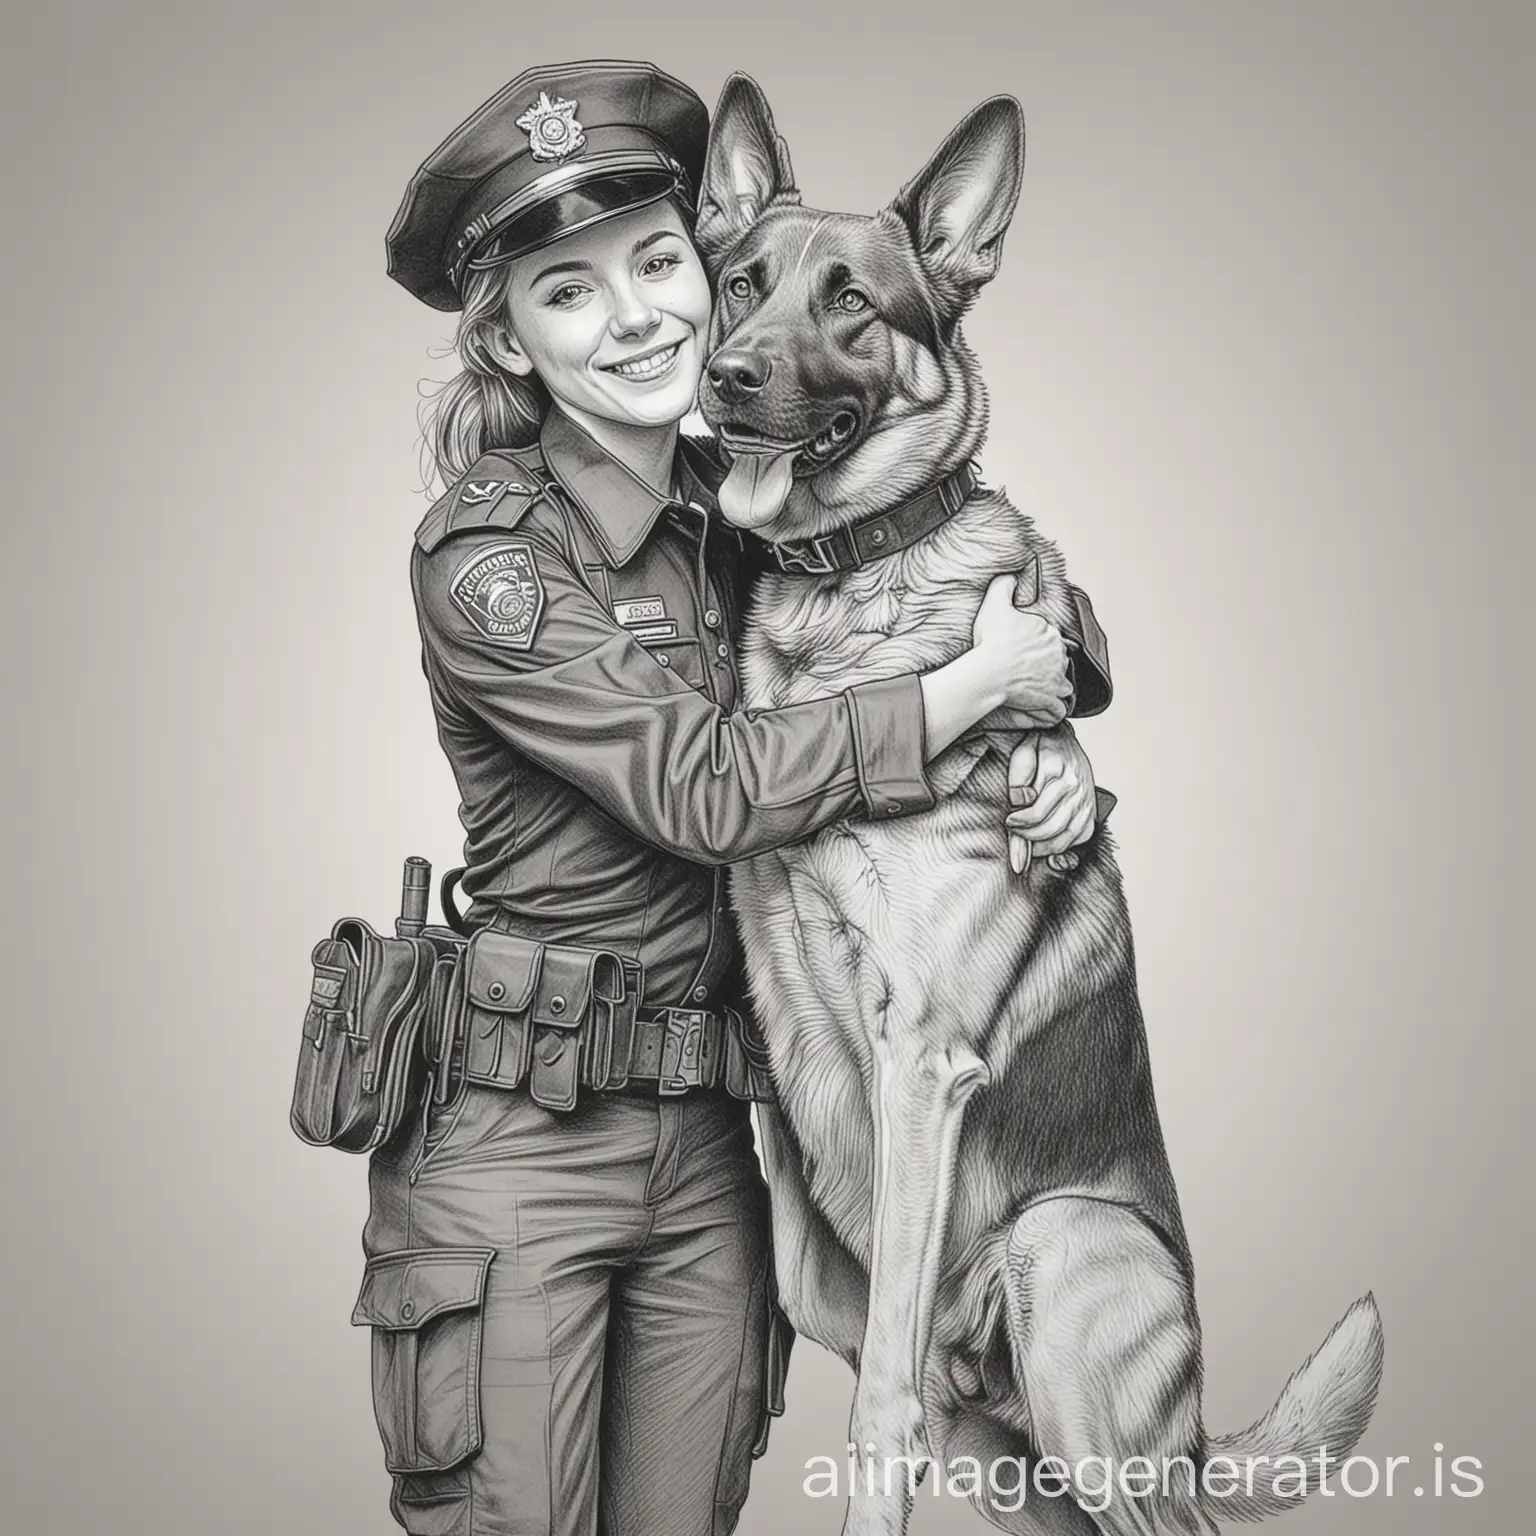 Policewoman-Embracing-Her-Police-Dog-in-Heartwarming-Line-Drawing